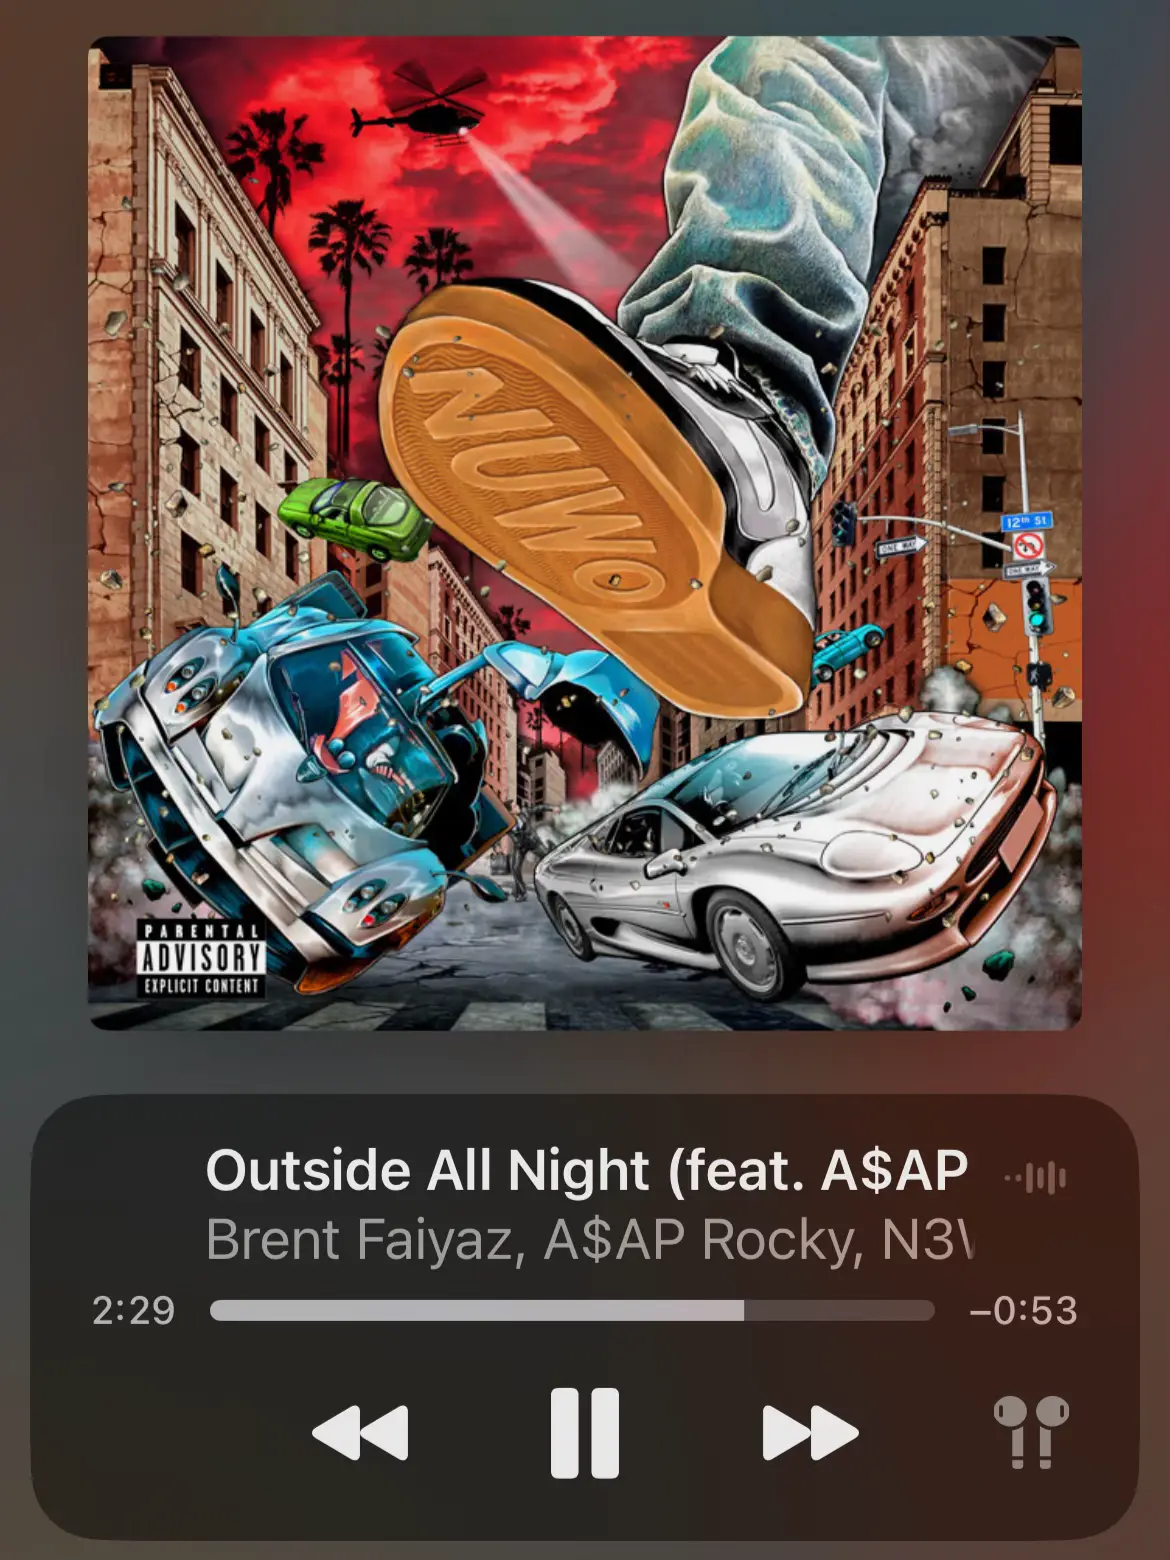  A song with the words "Outside All Night" on it.